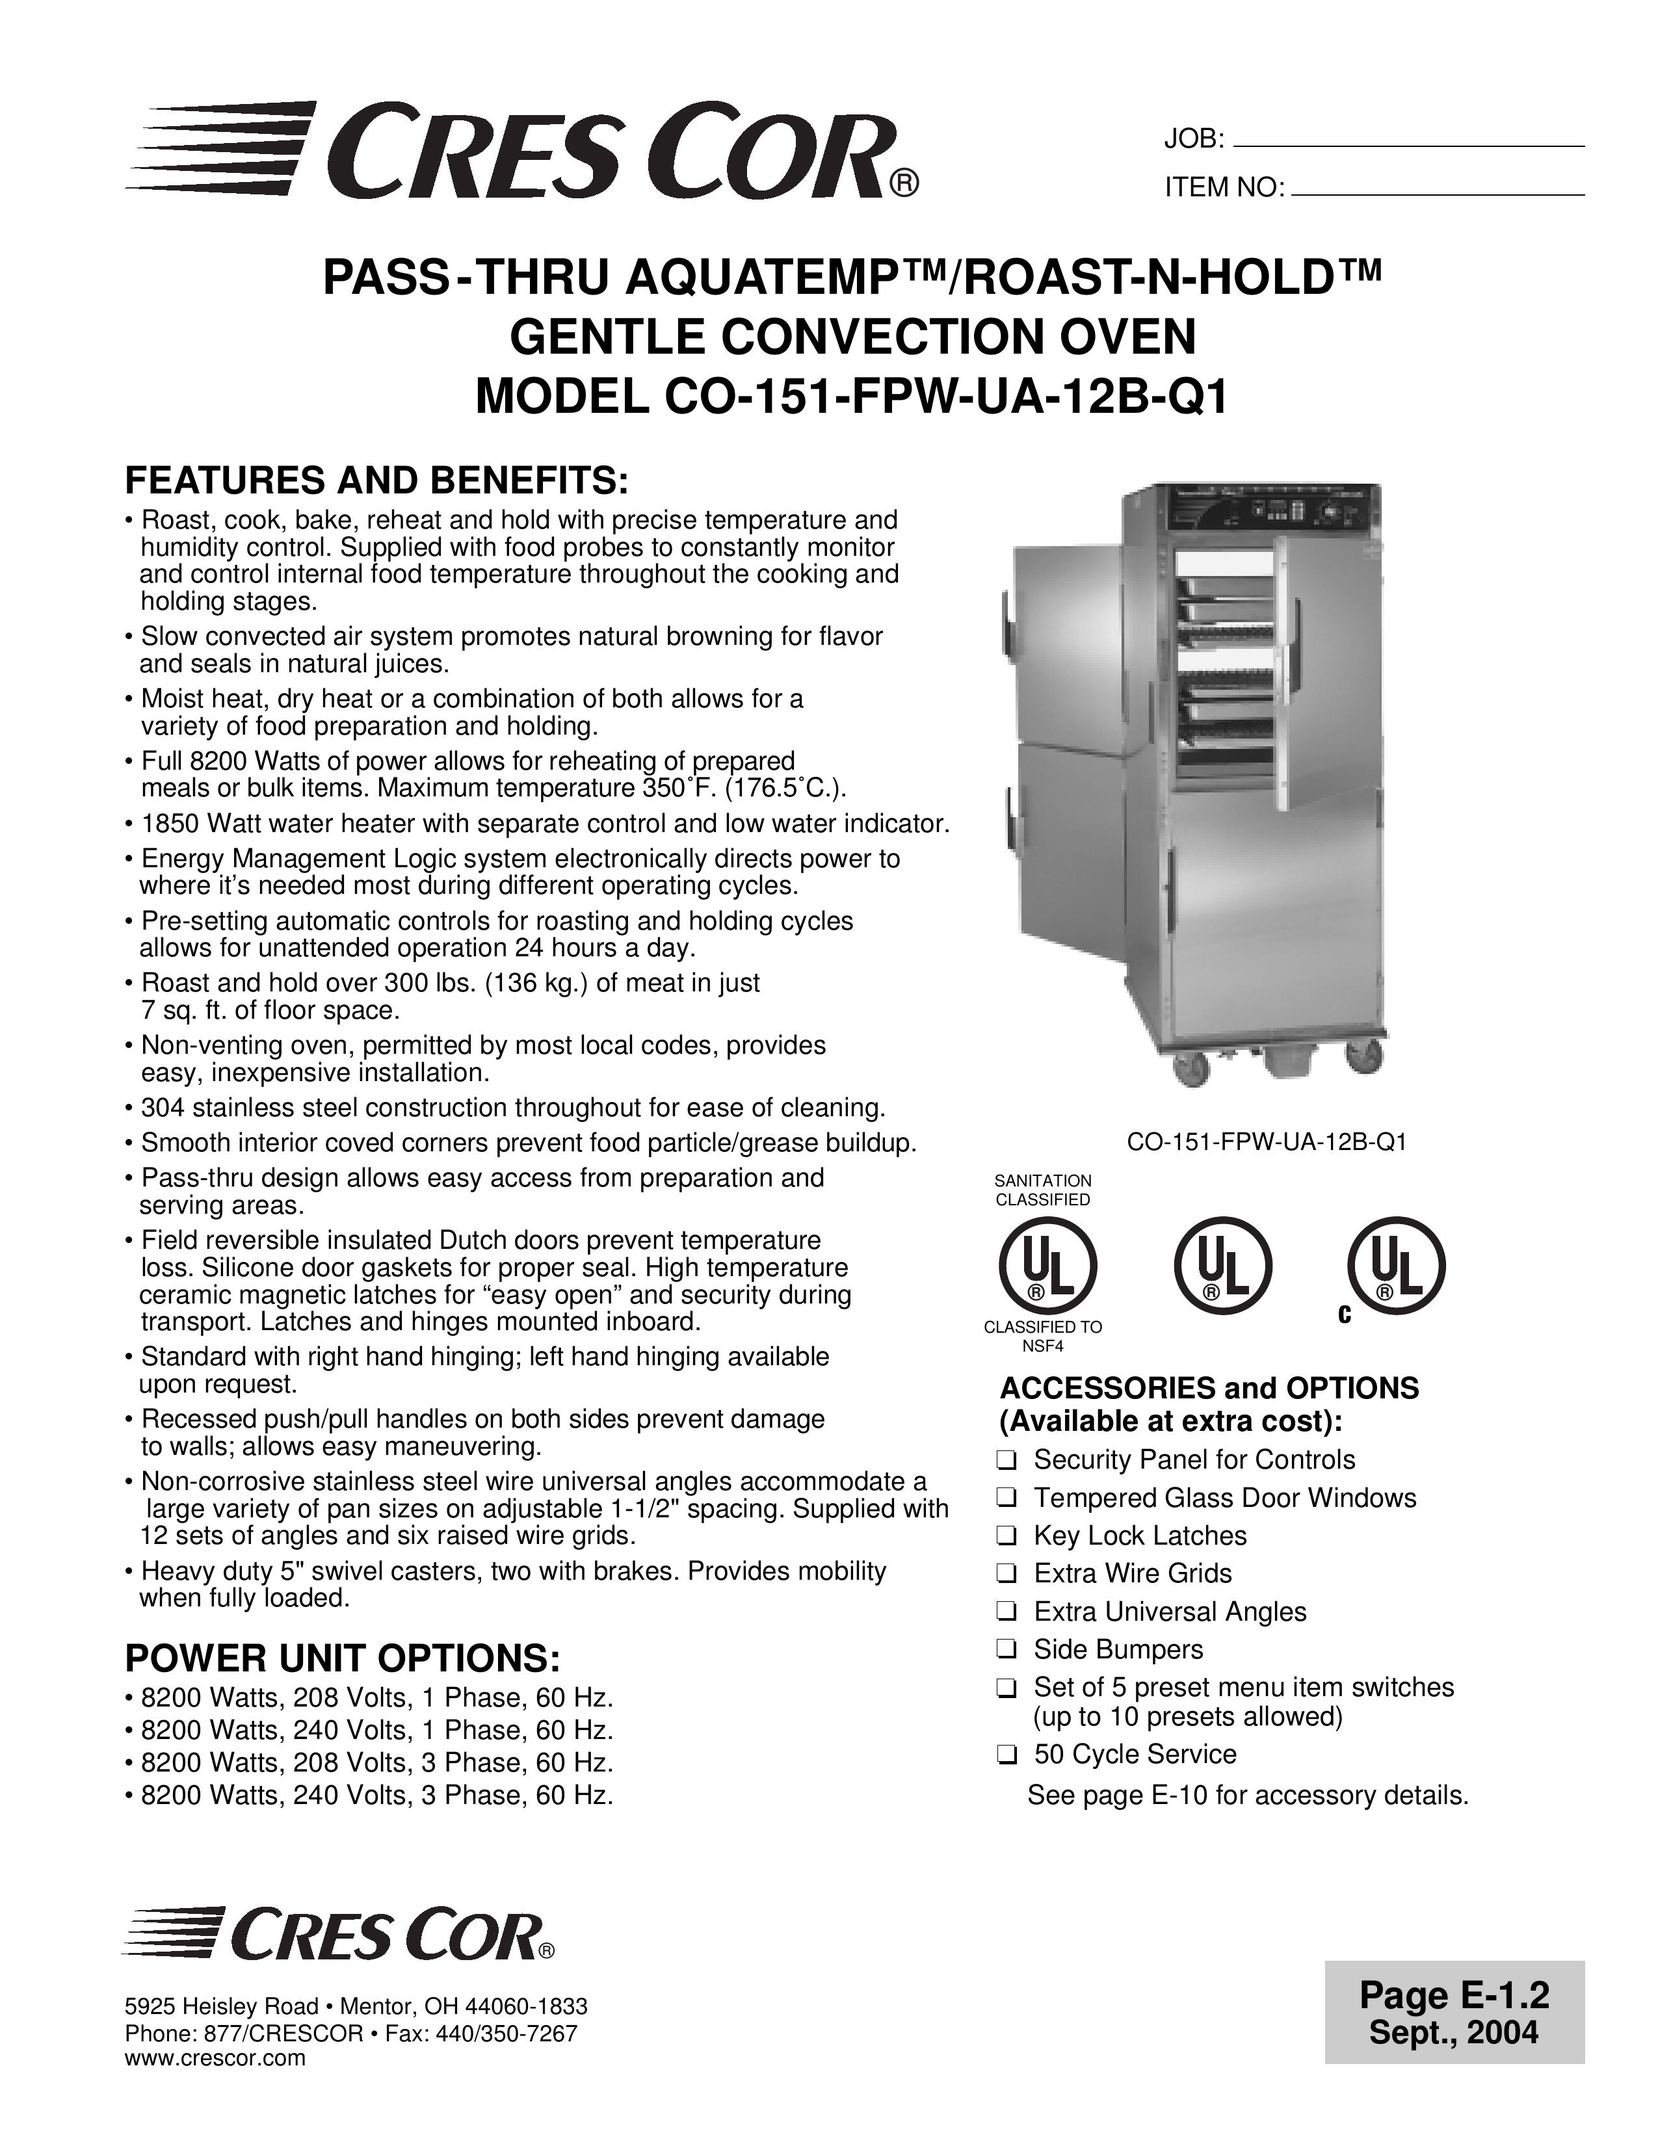 Cres Cor CO-151-FPW-UA-12B-Q1 Convection Oven User Manual